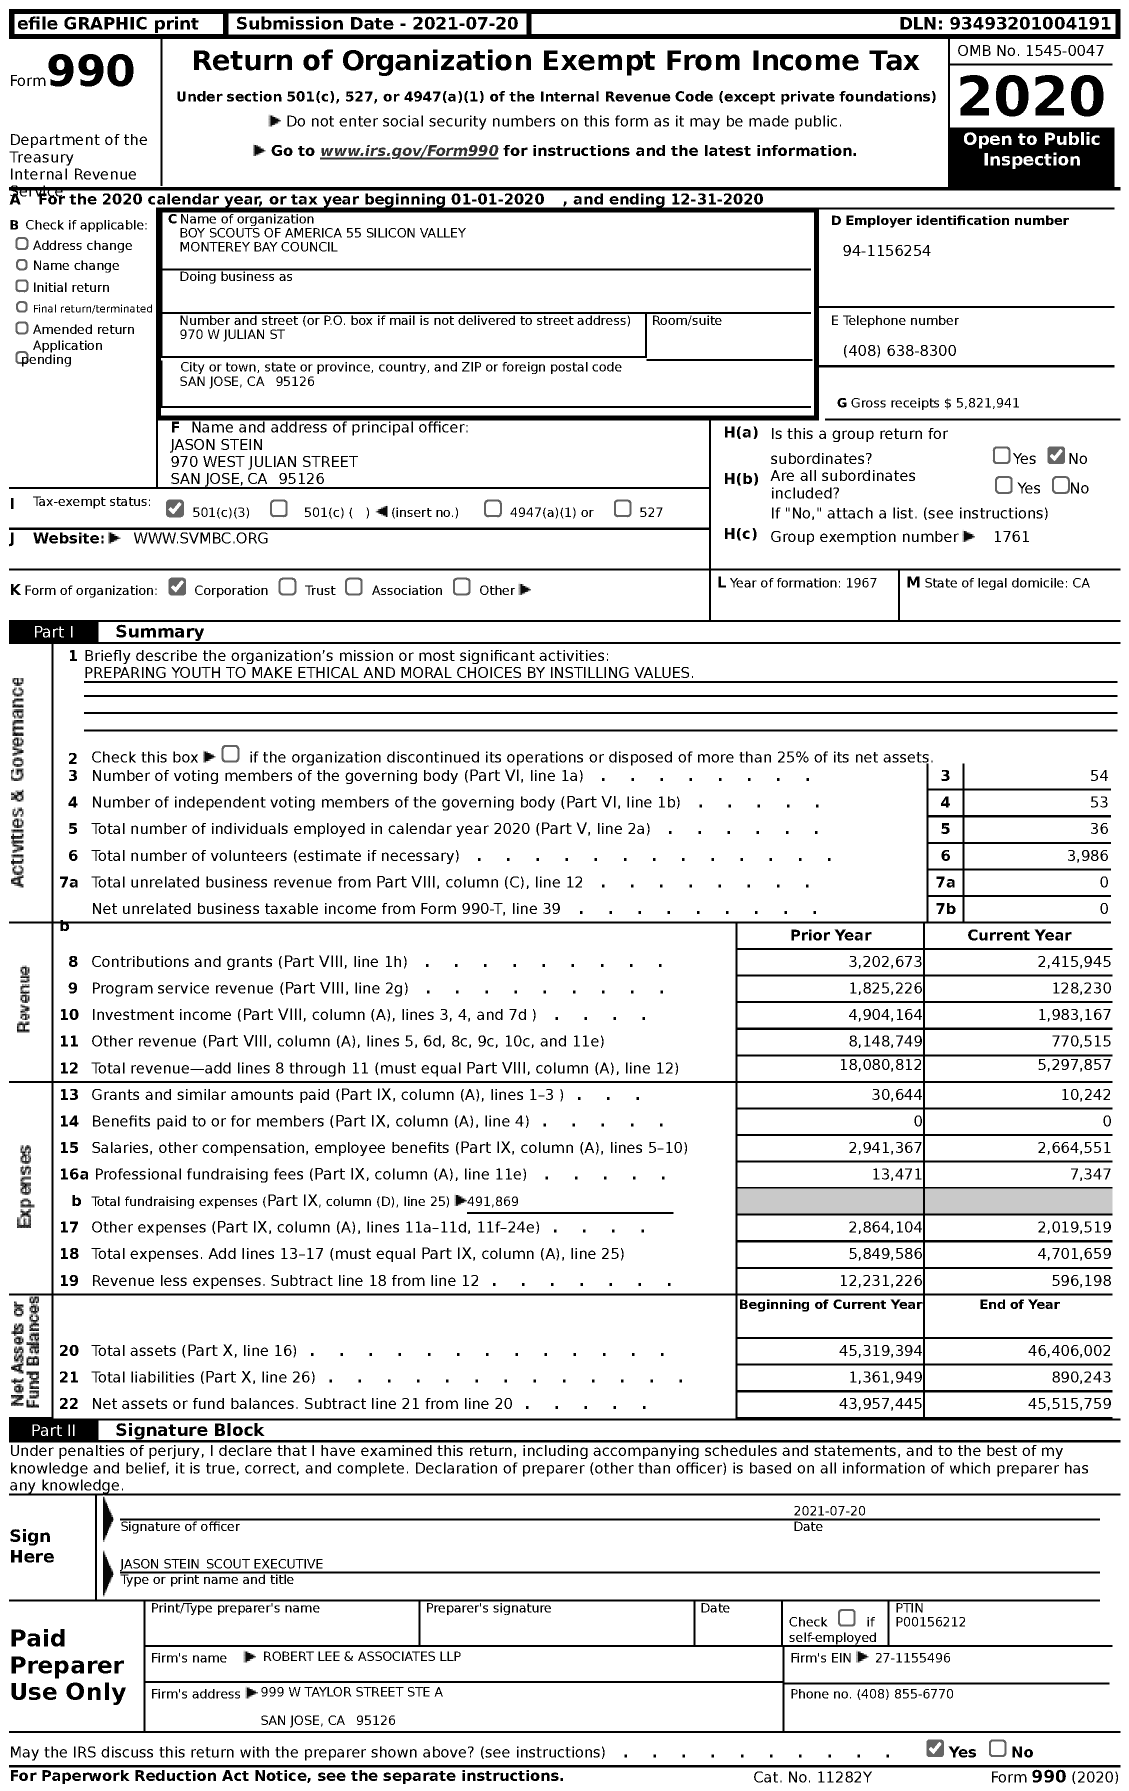 Image of first page of 2020 Form 990 for Silicon Valley Monterey Bay Council (SVMBC)